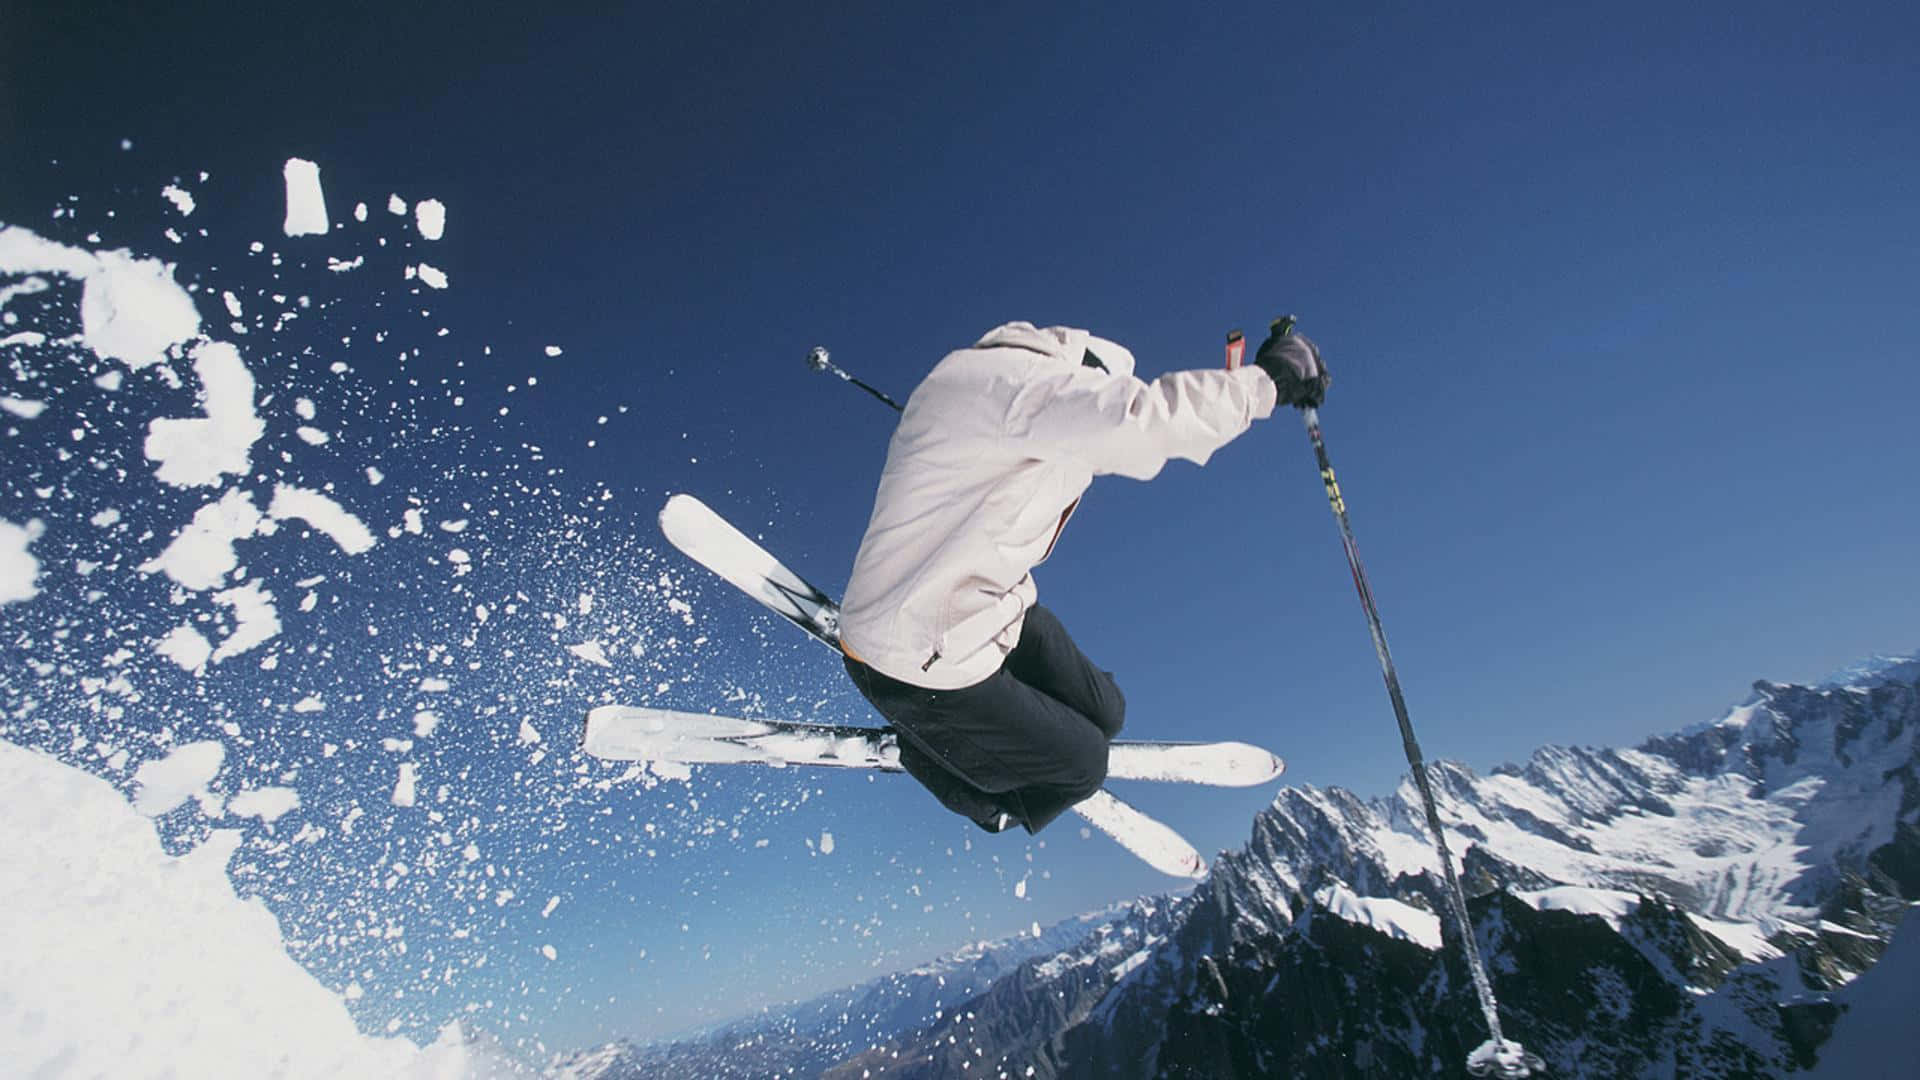 Take a break from the stresses of life and enjoy a day on the ski mountain. Wallpaper